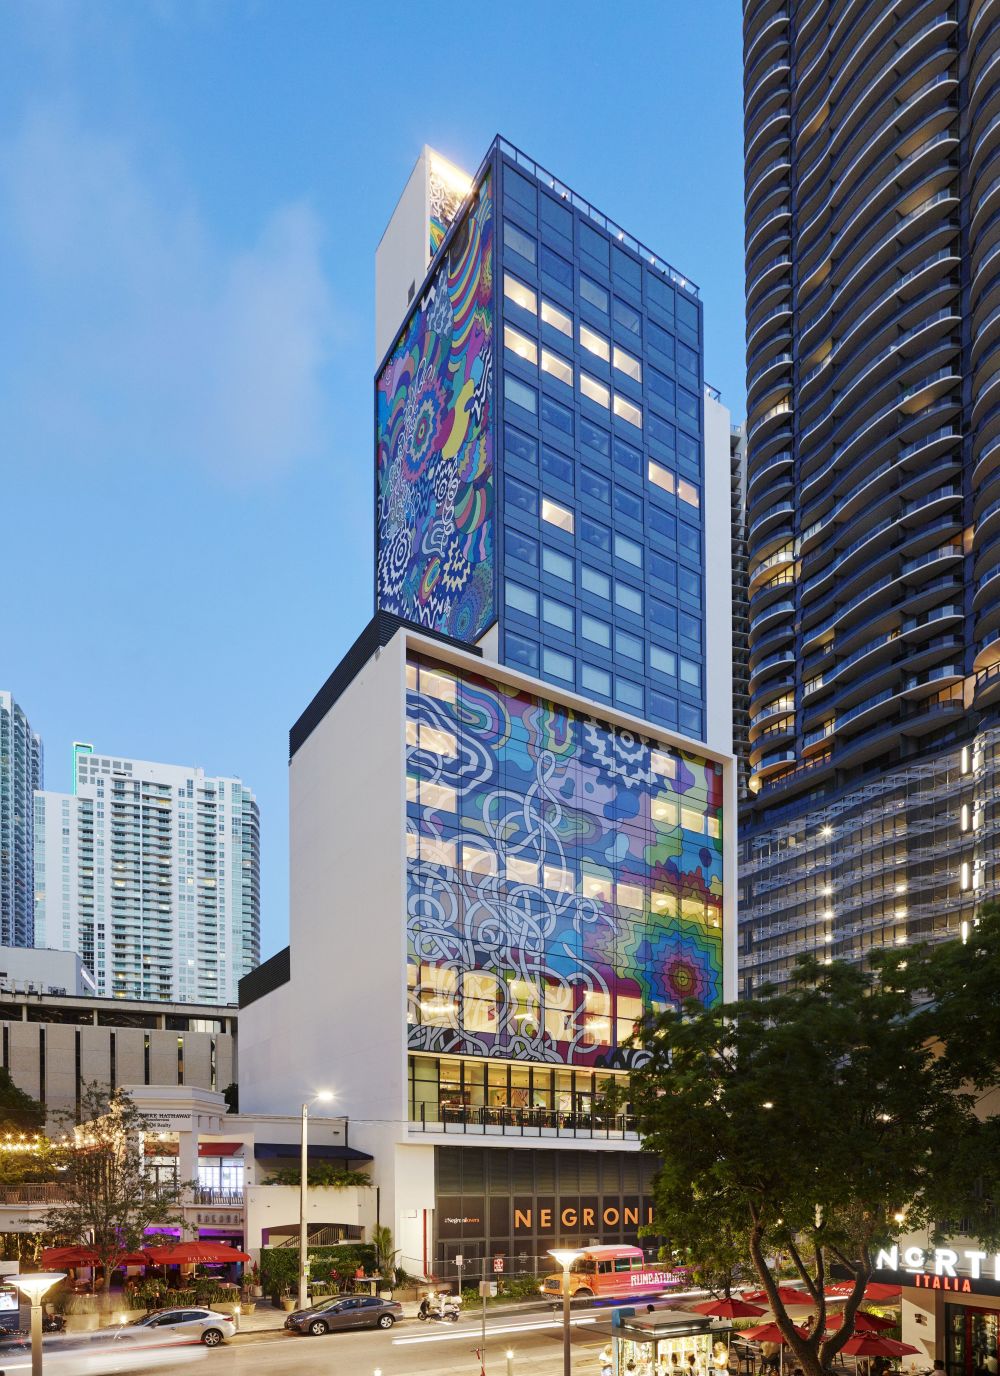 You can be pretty sure Miami will dazzle you, take your breath away, make you swoon like a palm tree in the ocean breeze. What you need is the best possible place to recover – so you can swoon again the next day. Well, you found it! Come this way for the best sleep in Brickell.